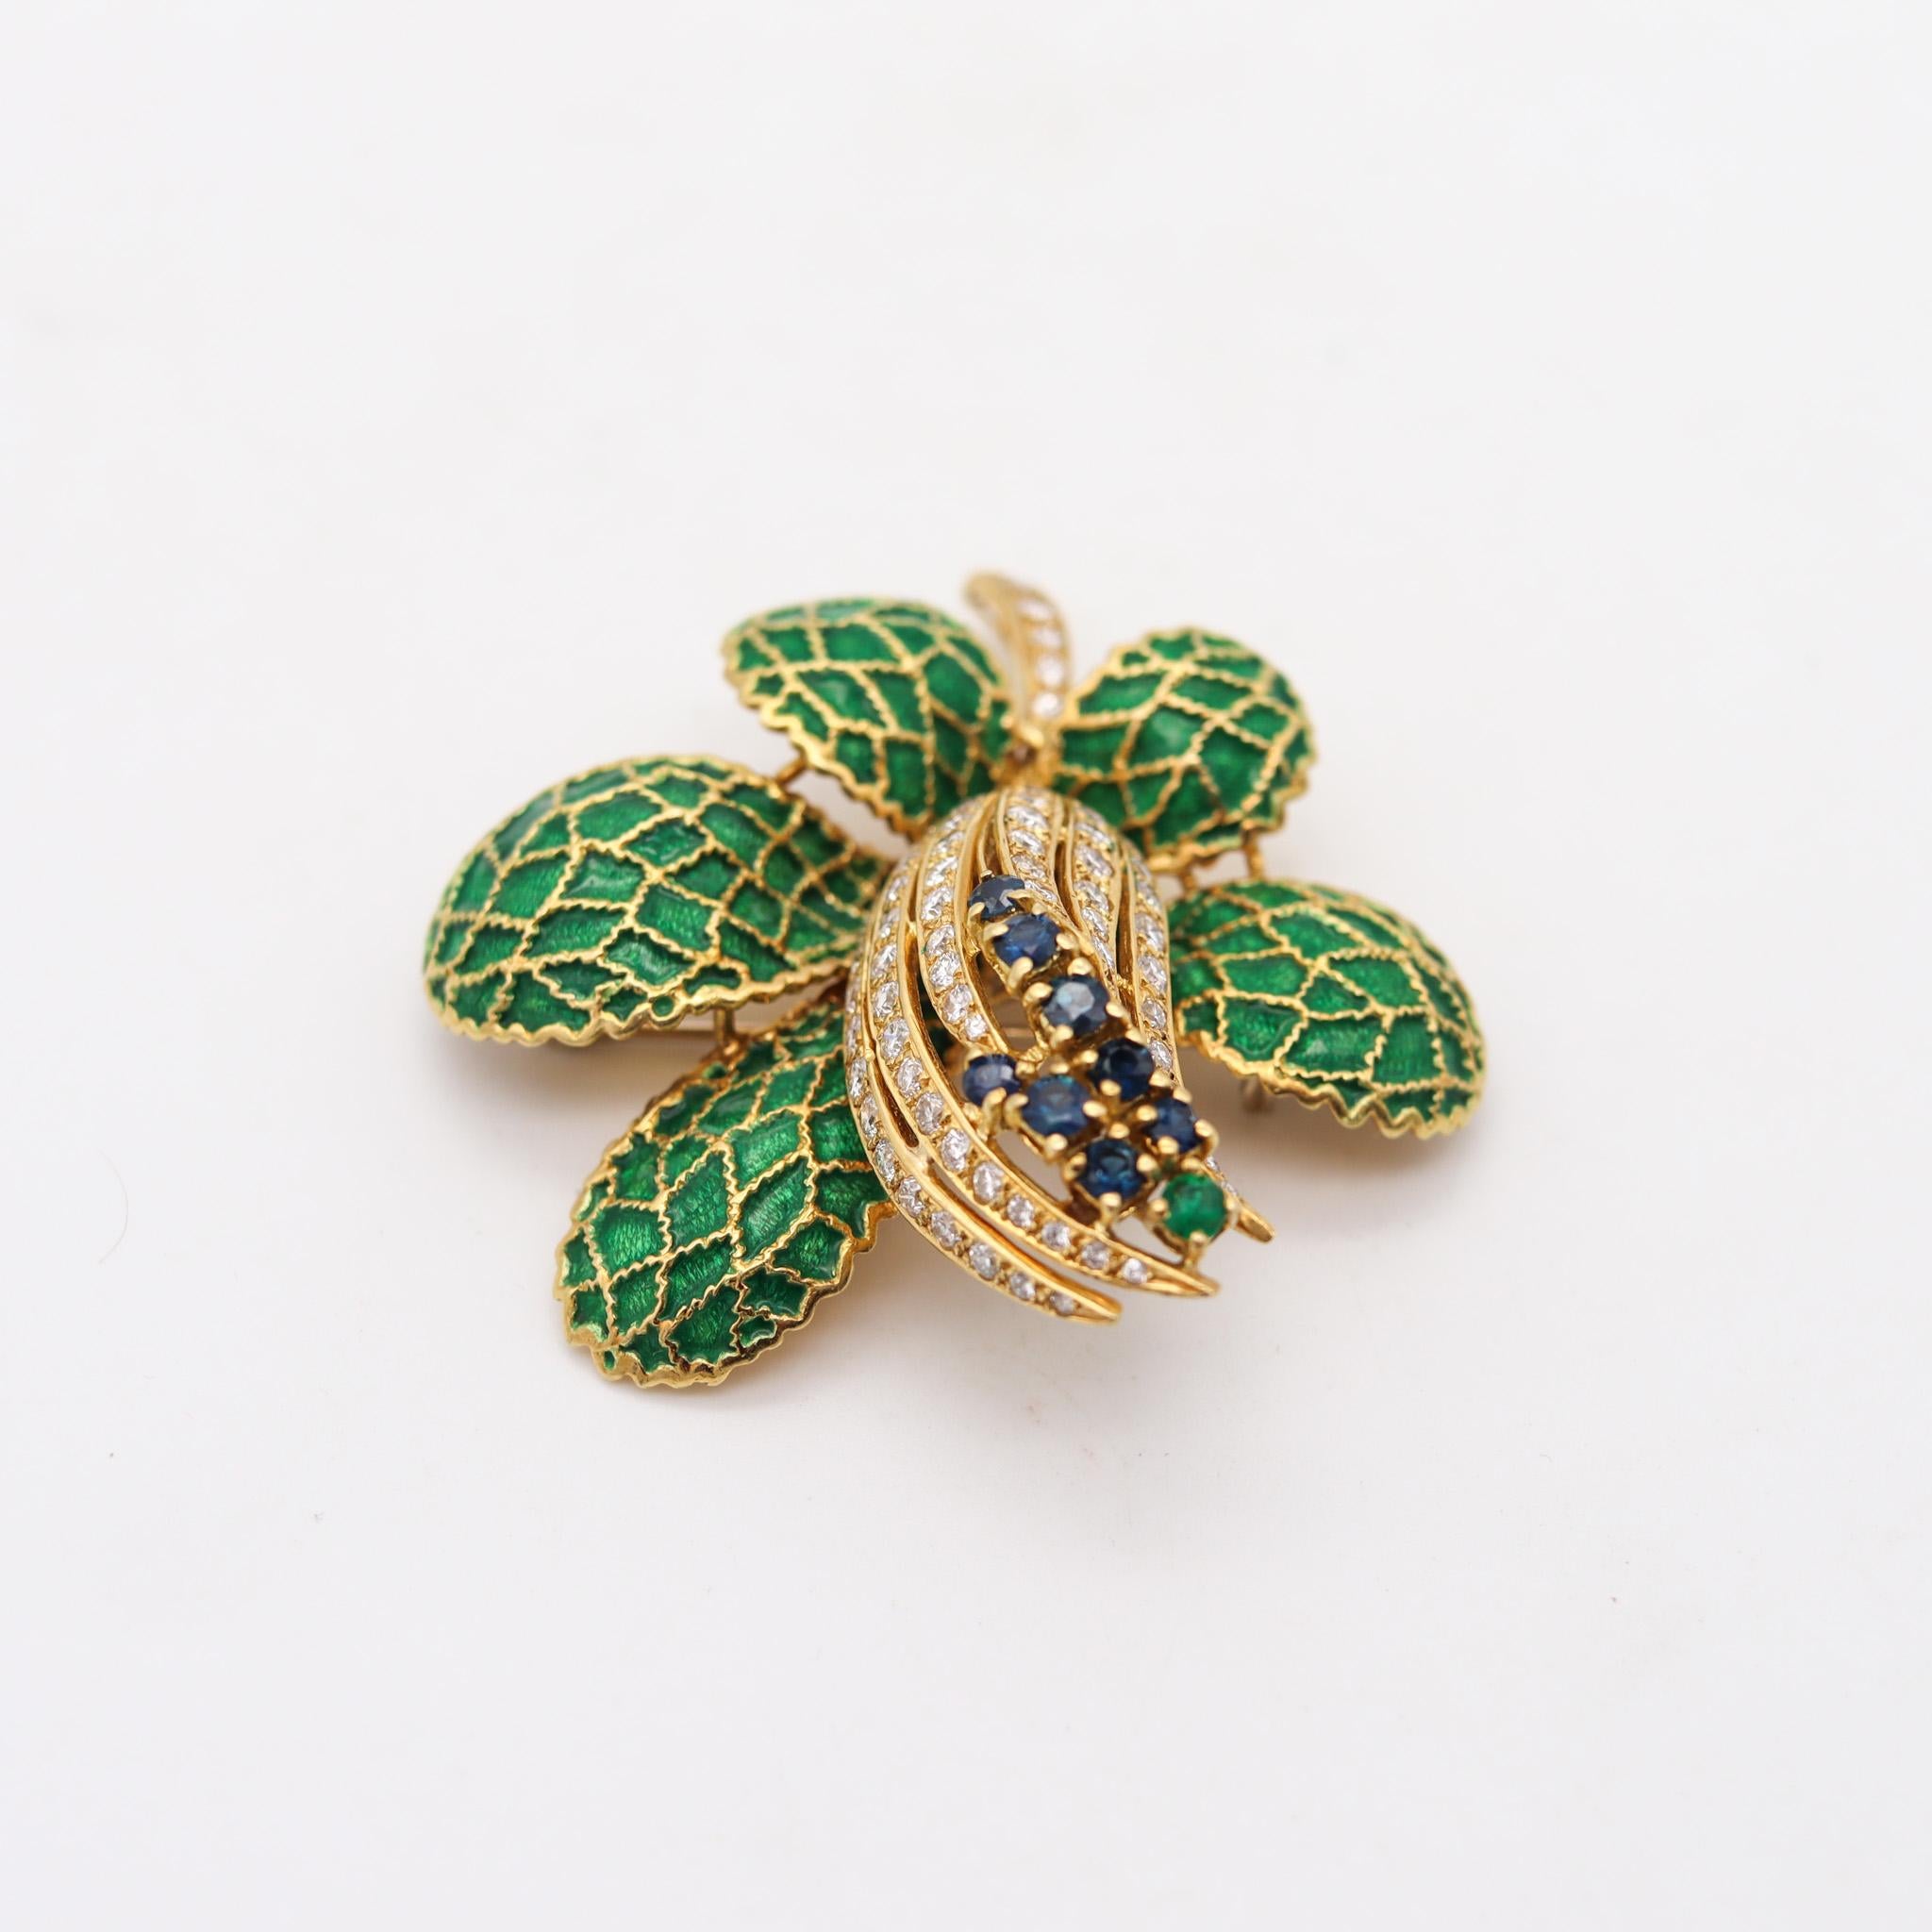 Modernist Italy Mid Century 1960 Enamel Brooch 18Kt Gold With 4.42 Ctw Diamonds Sapphires For Sale